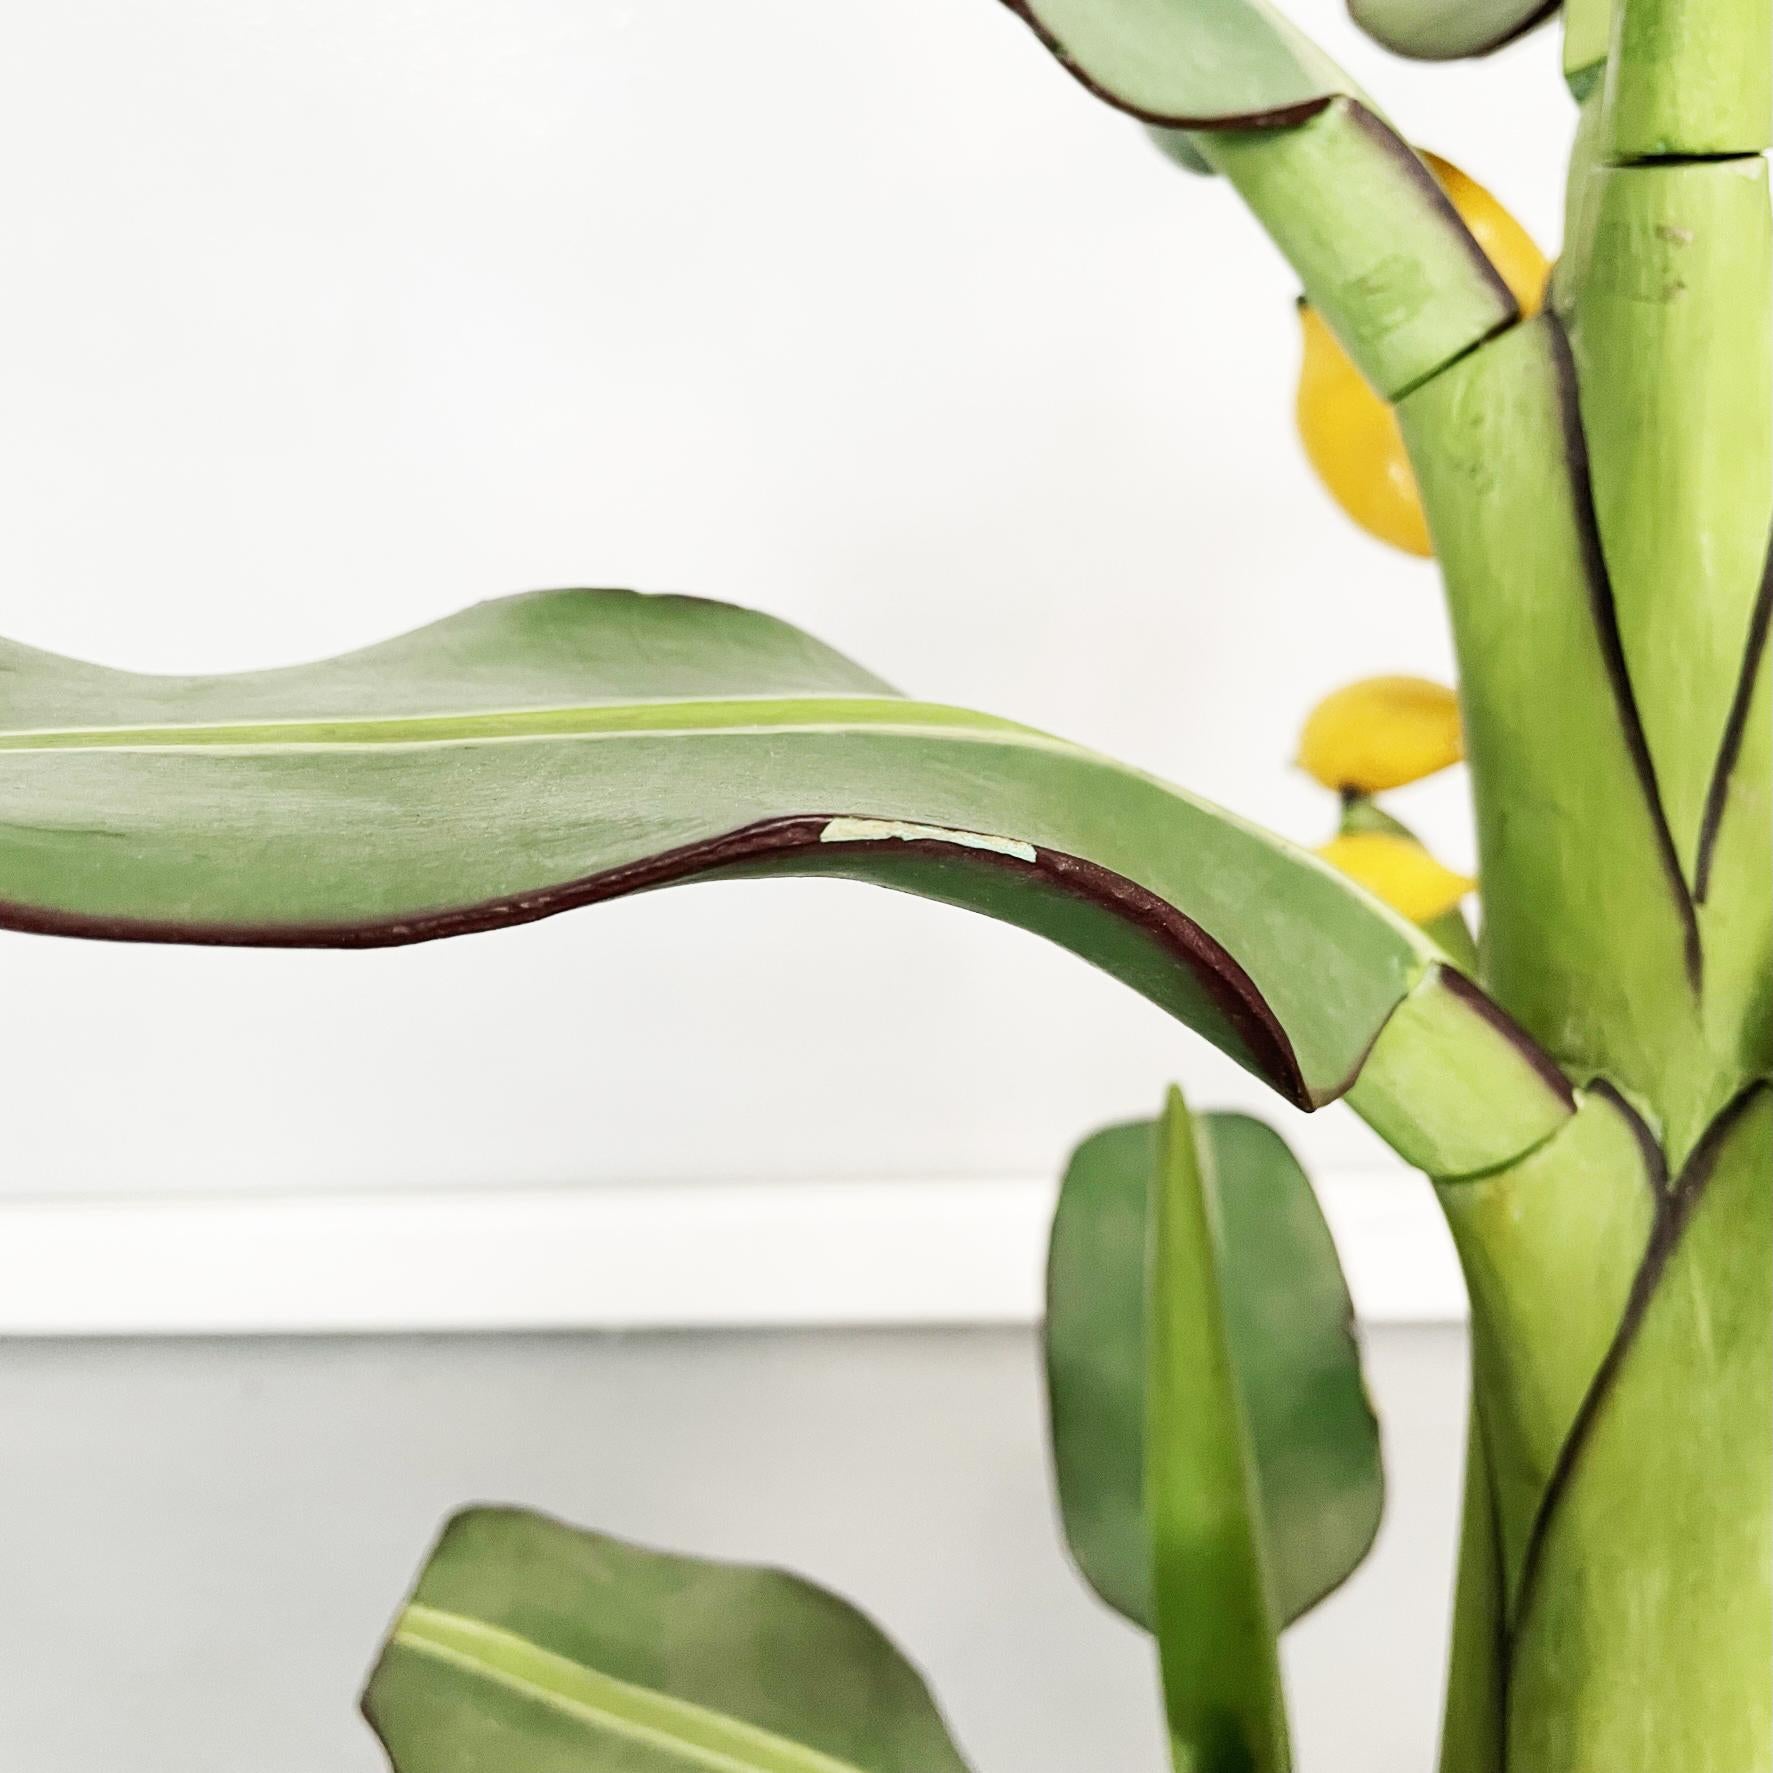 Italian Mid-Century Modern Wooden Sculpture of a Banana Plant, 1950s For Sale 3